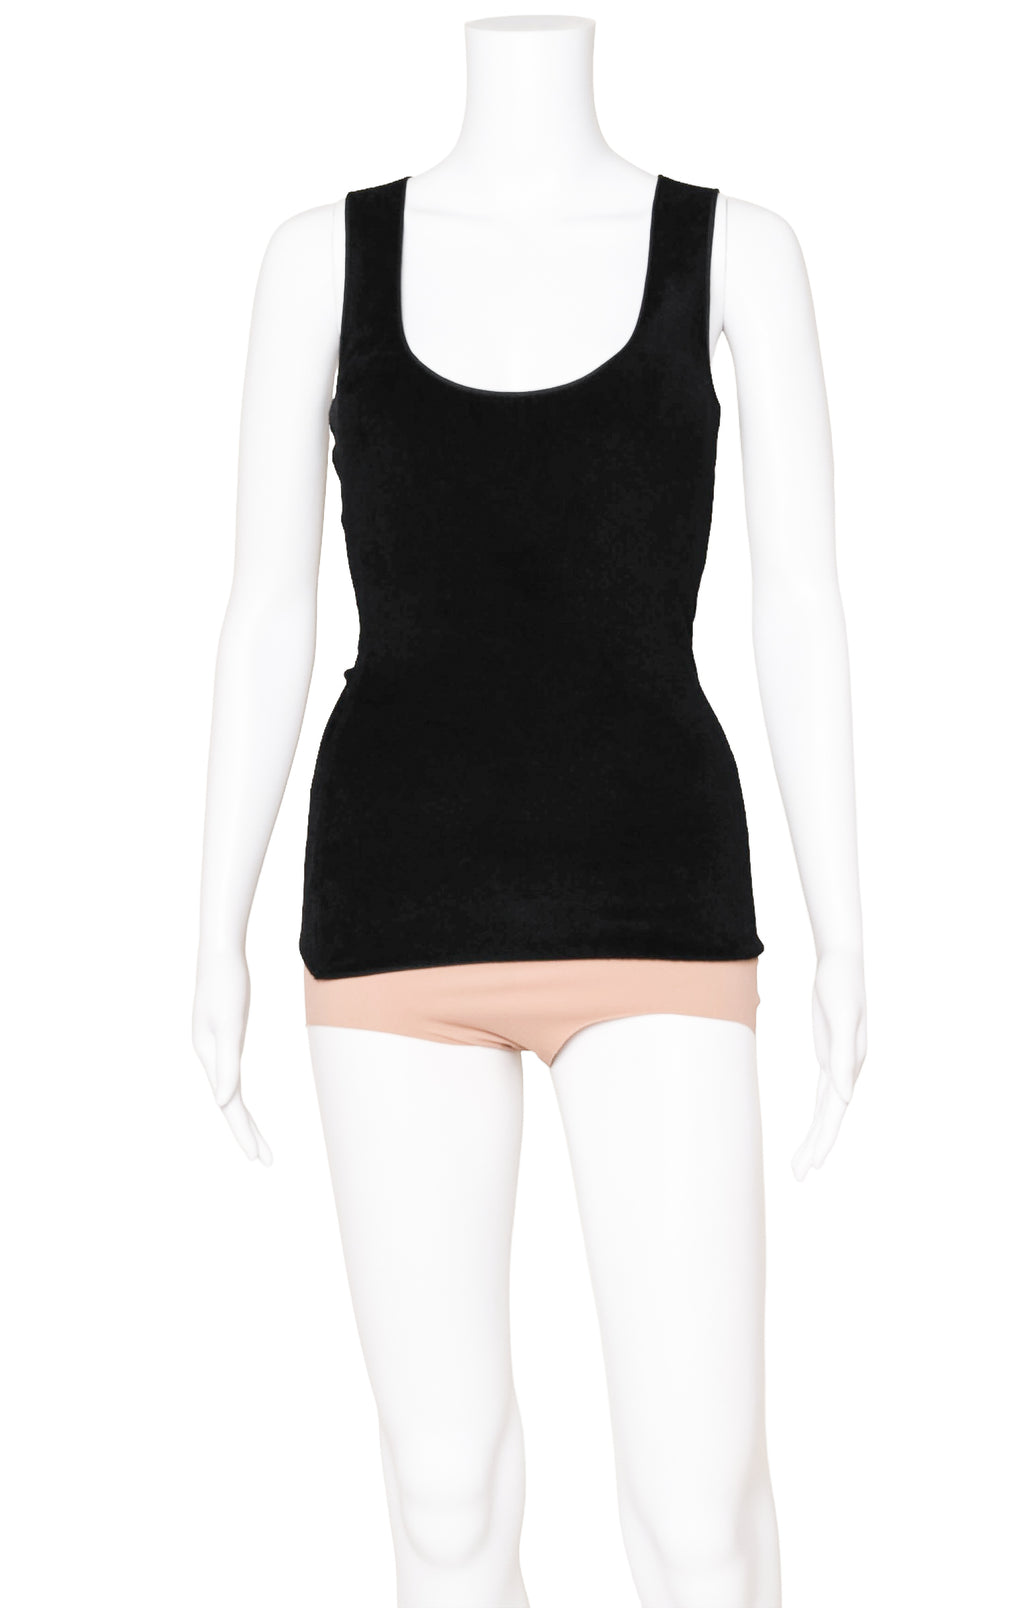 TOM FORD (RARE) Top Size: No size tags, fits like M/L